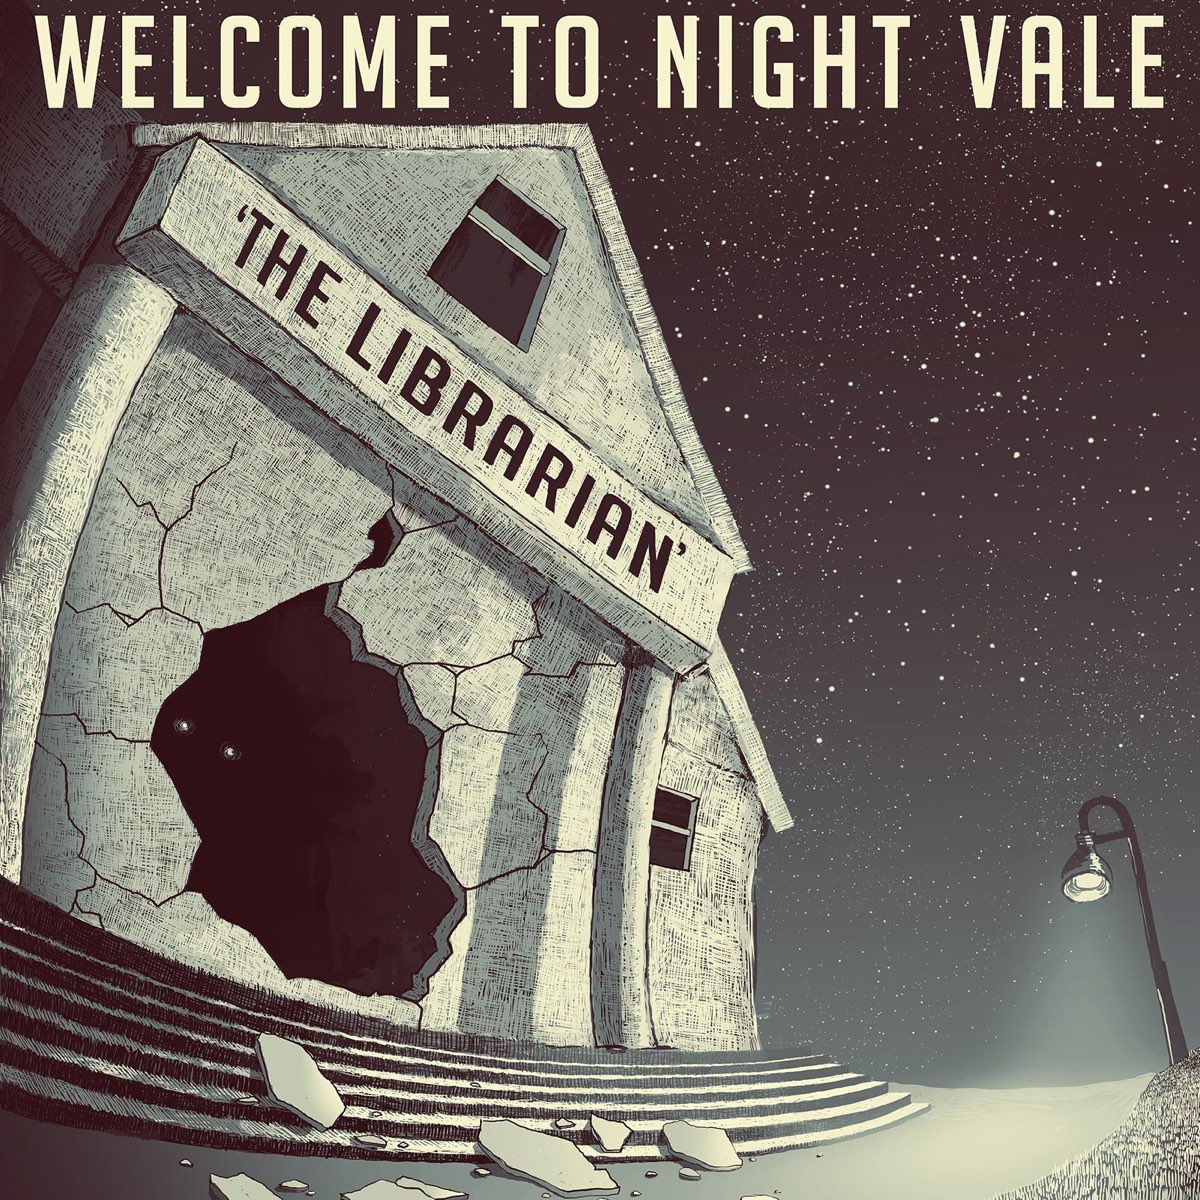 Welcome to live. Welcome to Night Vale. Night Vale Podcast. Ангелы Welcome to Nightvale. Welcome to Night Vale мемы.